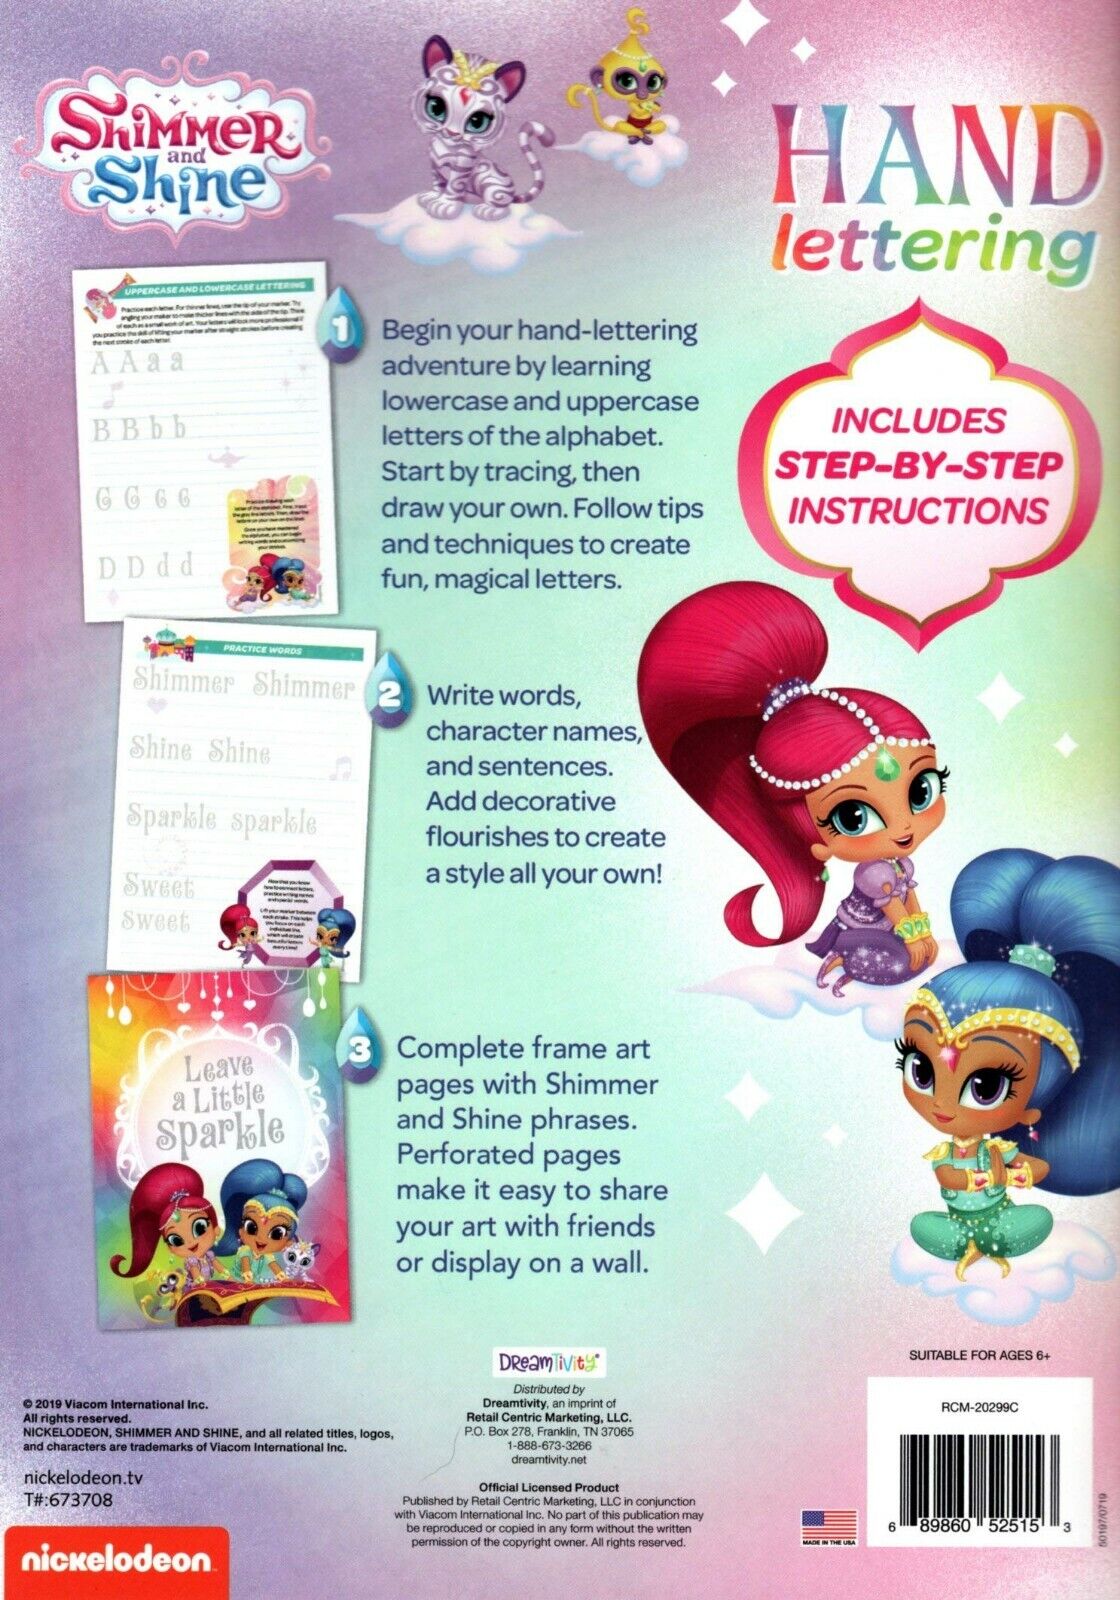 Shimmer and Shine - Hand Lettering & Doodles Activity & Coloring Book